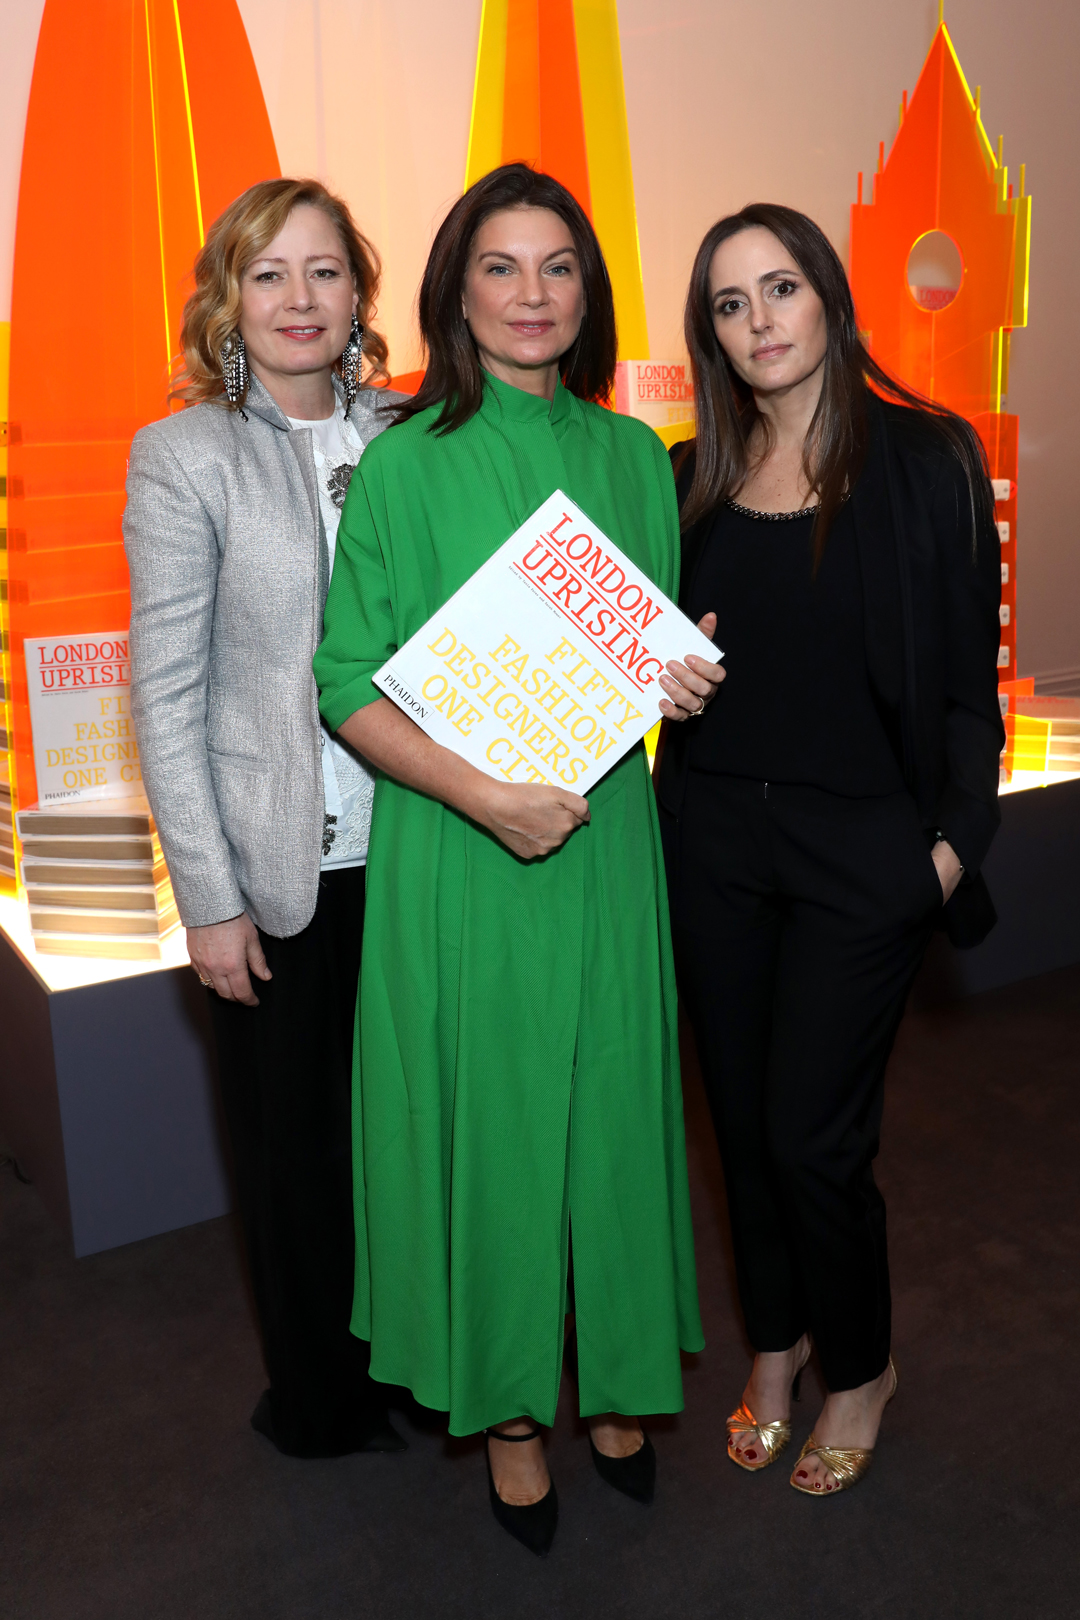 Sarah Mower MBE Natalie Massenet MBE and Tania Fares at Sotheby's last night